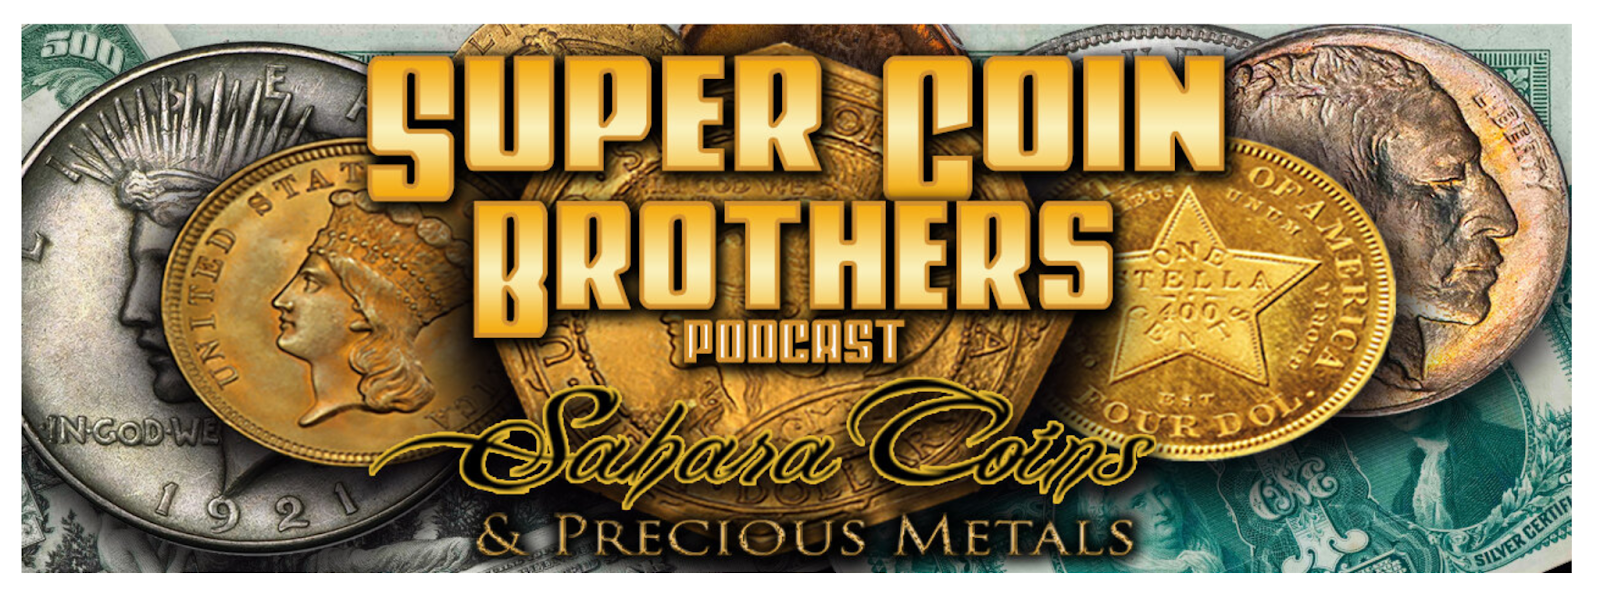 Super Coin Brothers Podcast